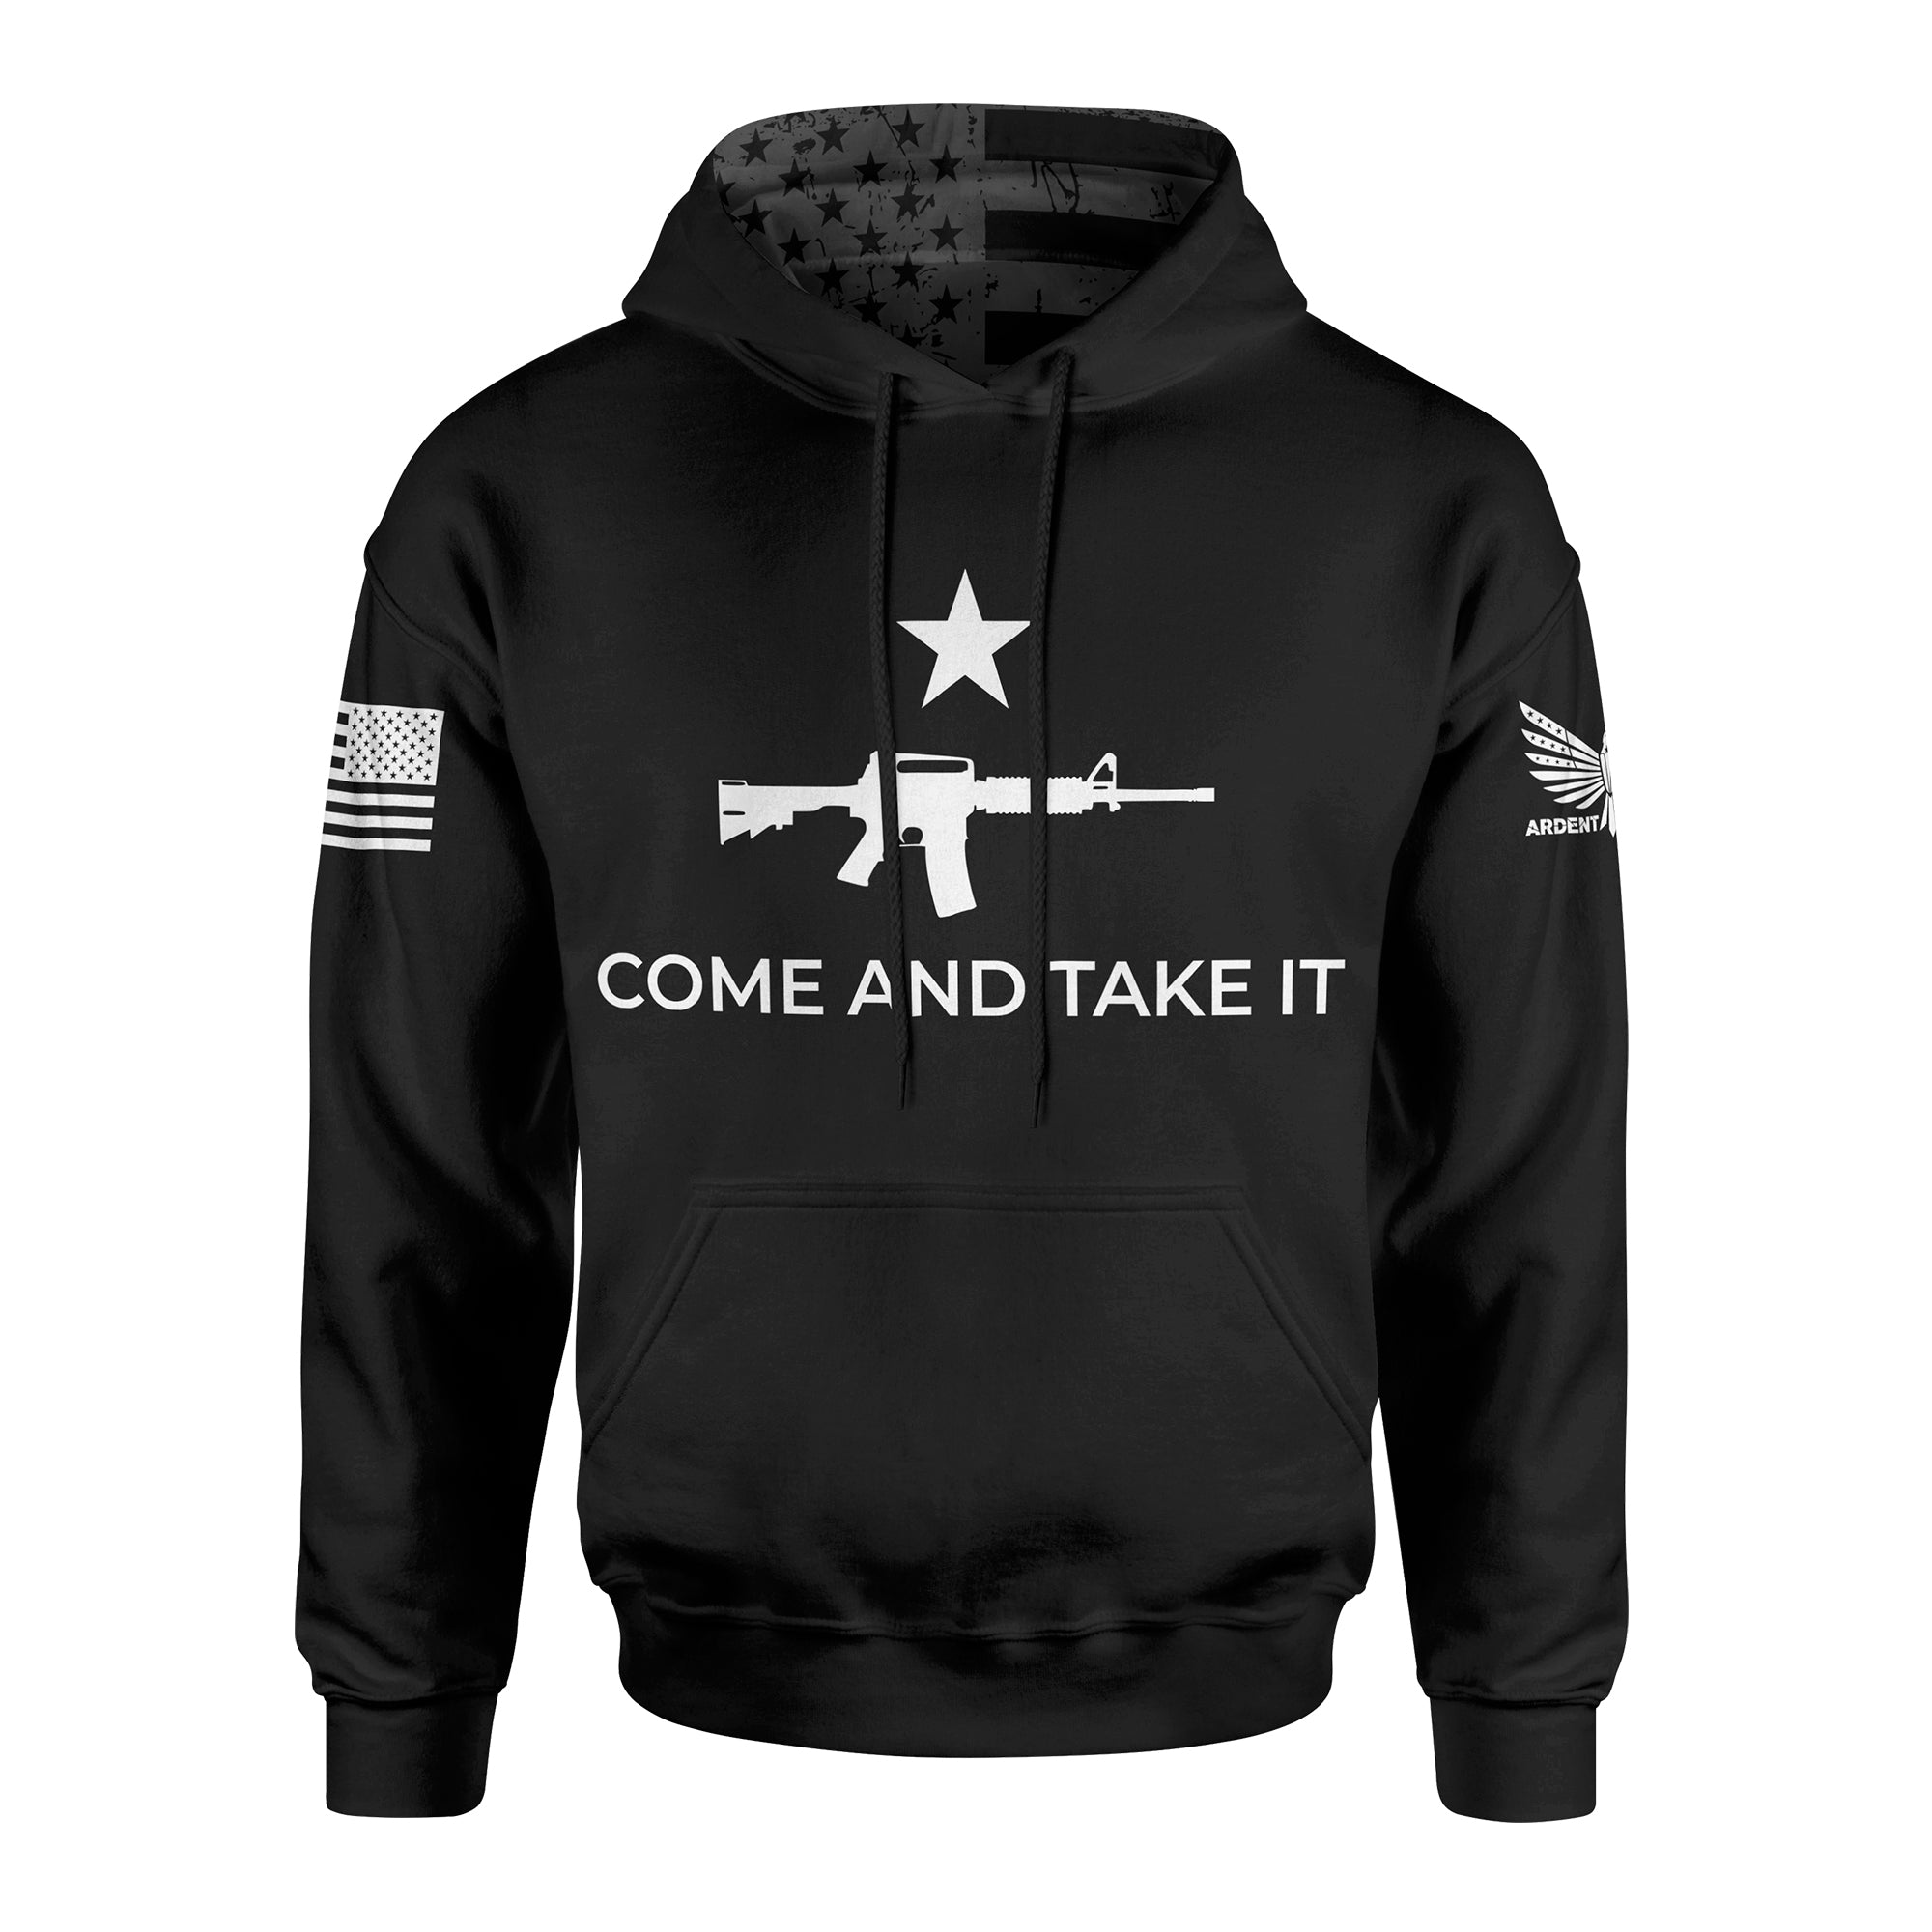 Come And Take It Hoodie Black-Premium Hoodie-XS-Ardent Patriot Apparel Co.